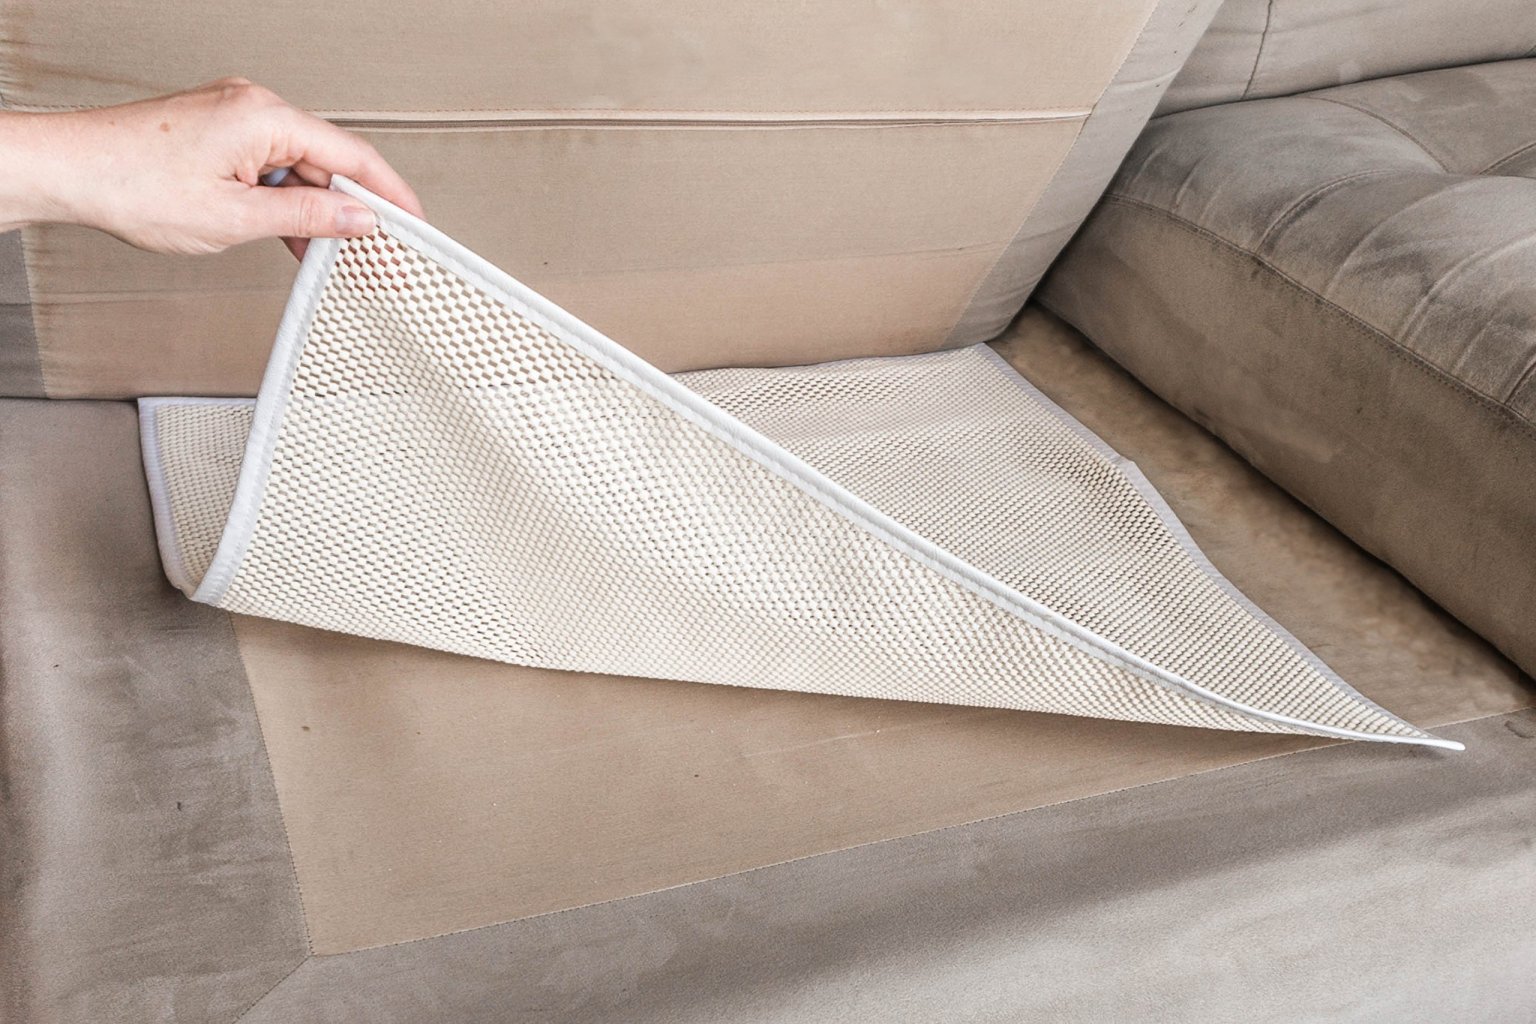 How To Prevent Cushions From Sliding